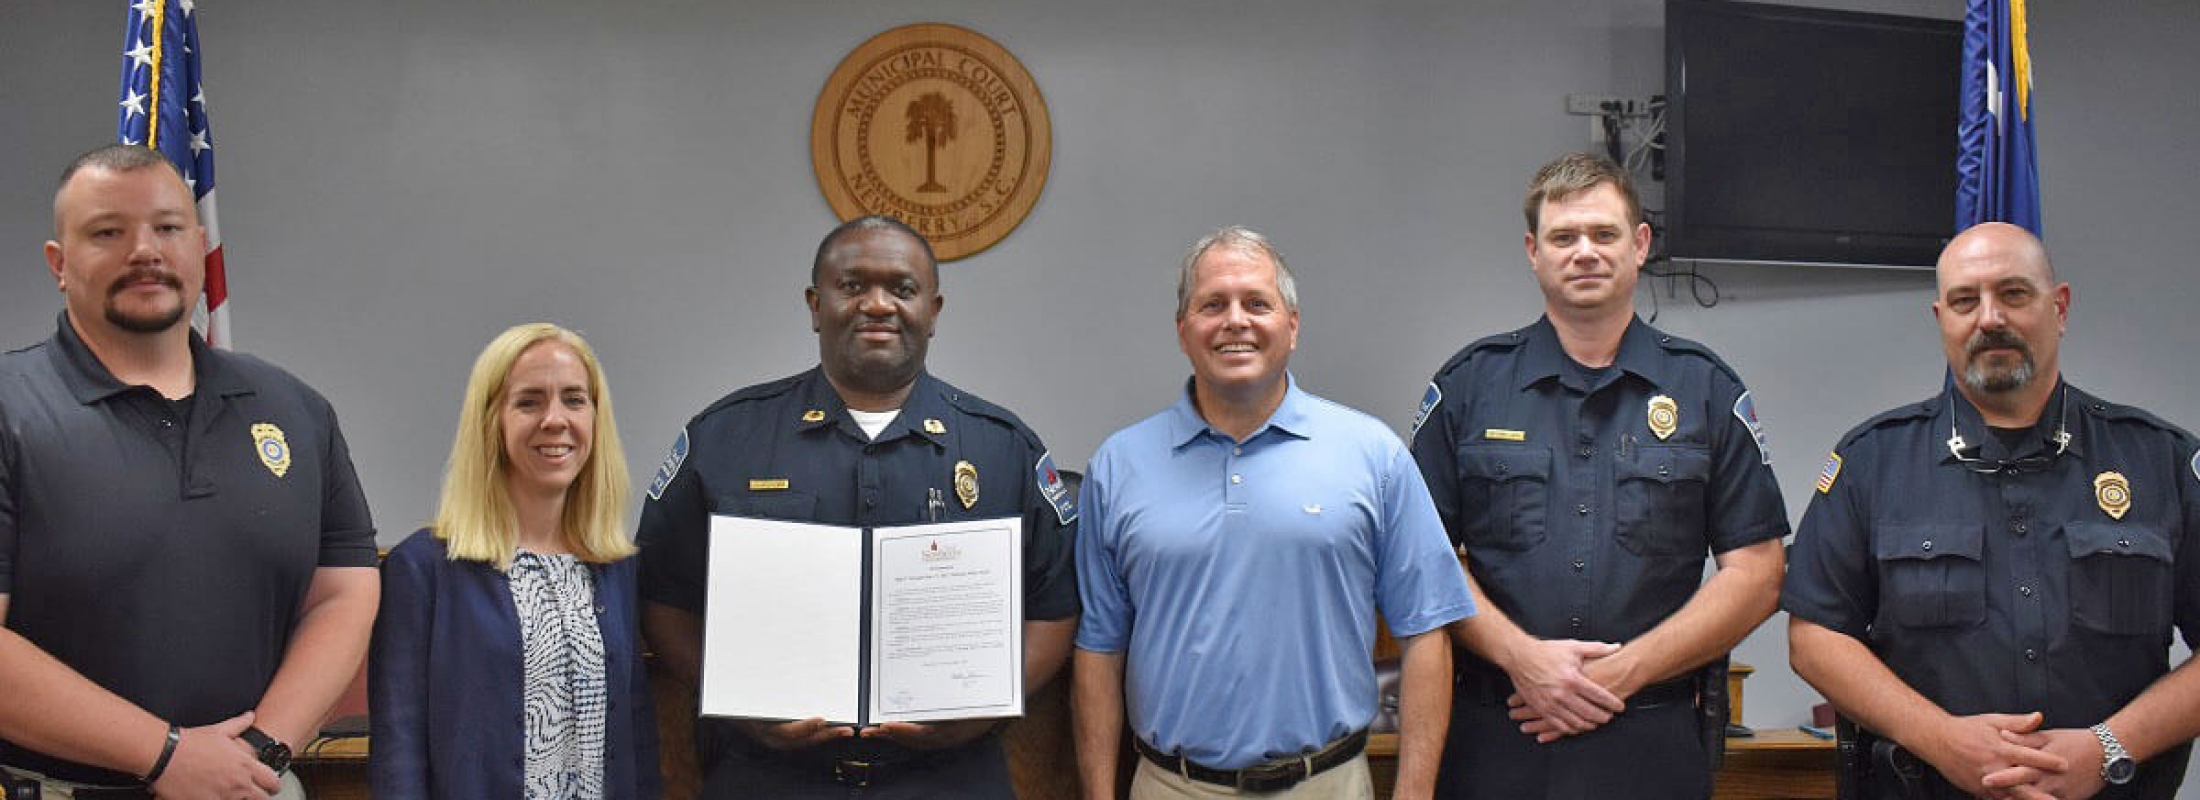 National Police Officers Week Proclaimed In Newberry WKDK AM 1240 /